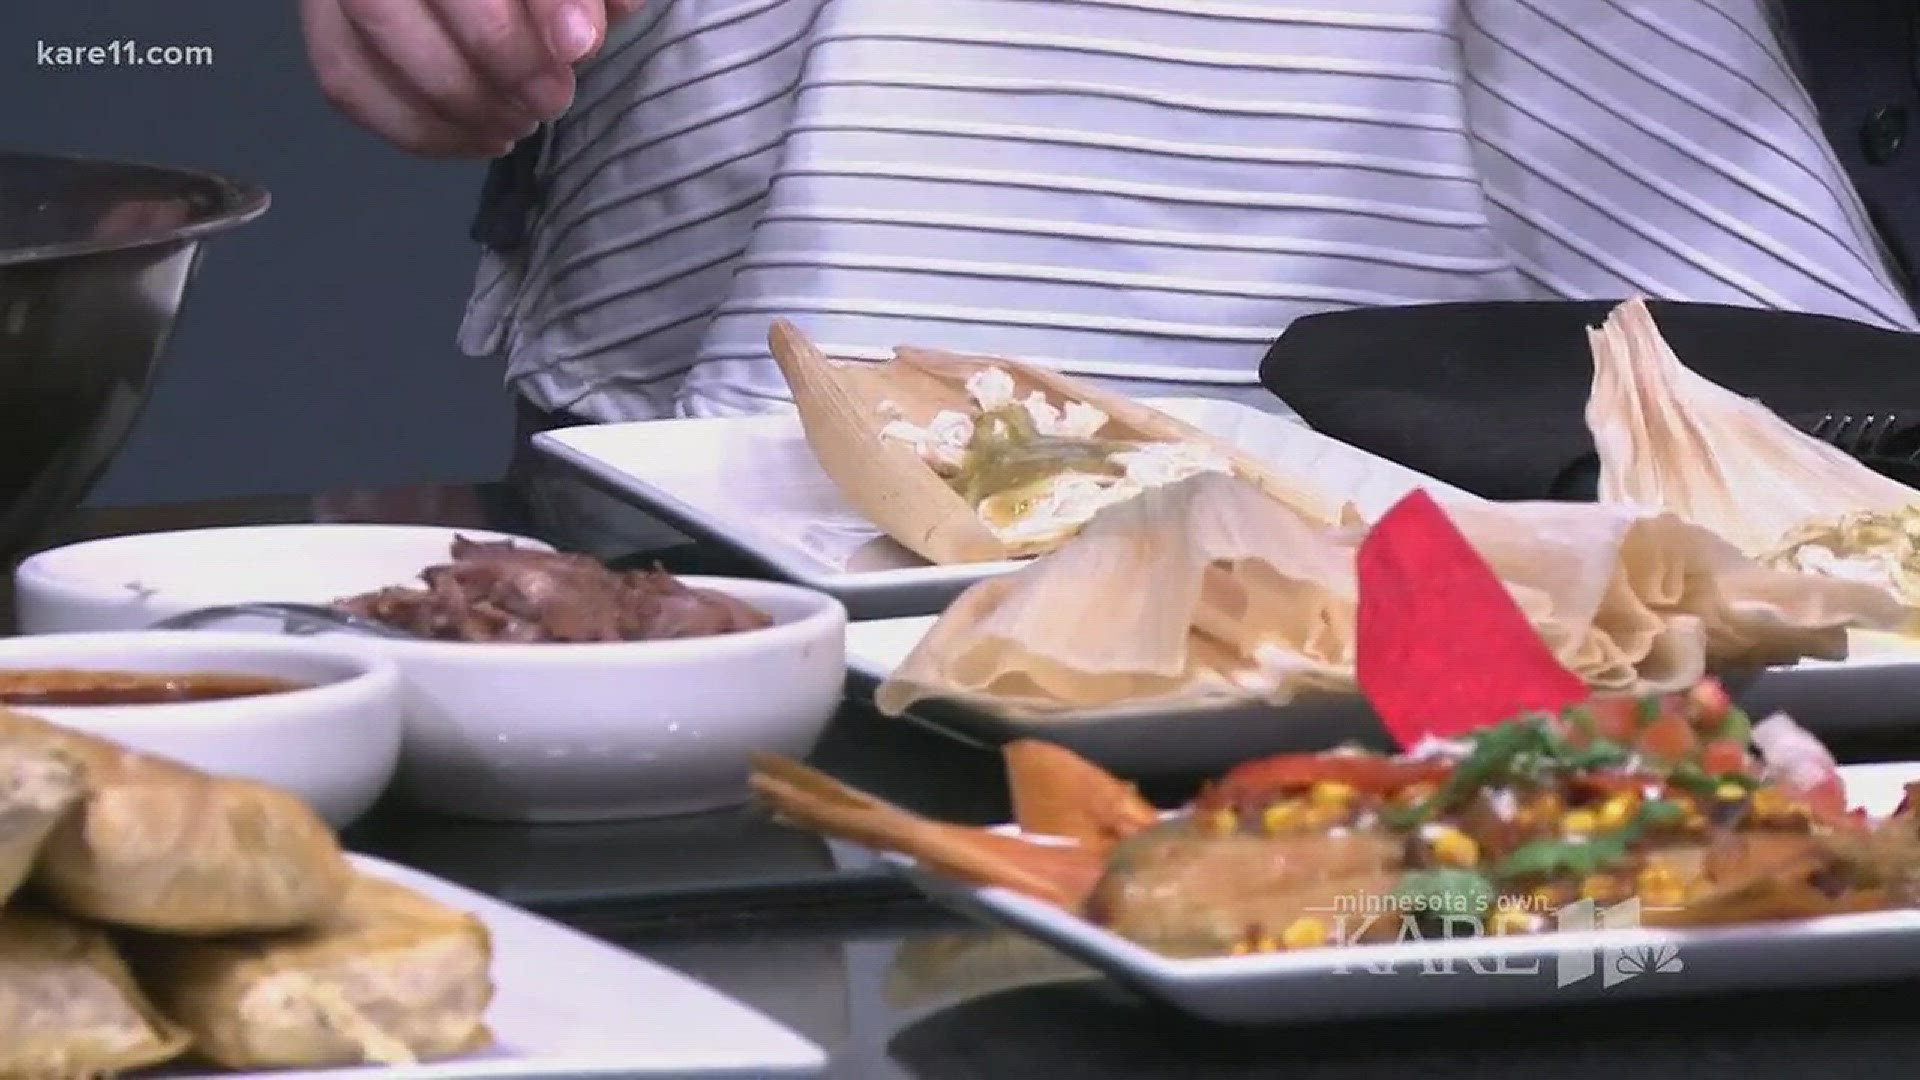 For Mexican-Americans tamales are a staple on Christmas Eve and a wonderful way to get the whole family involved in assembling them. Chef Mauricio Legorreta from Cantina Laredo shared his recipe and tips for making tamales. http://kare11.tv/2AEaz31